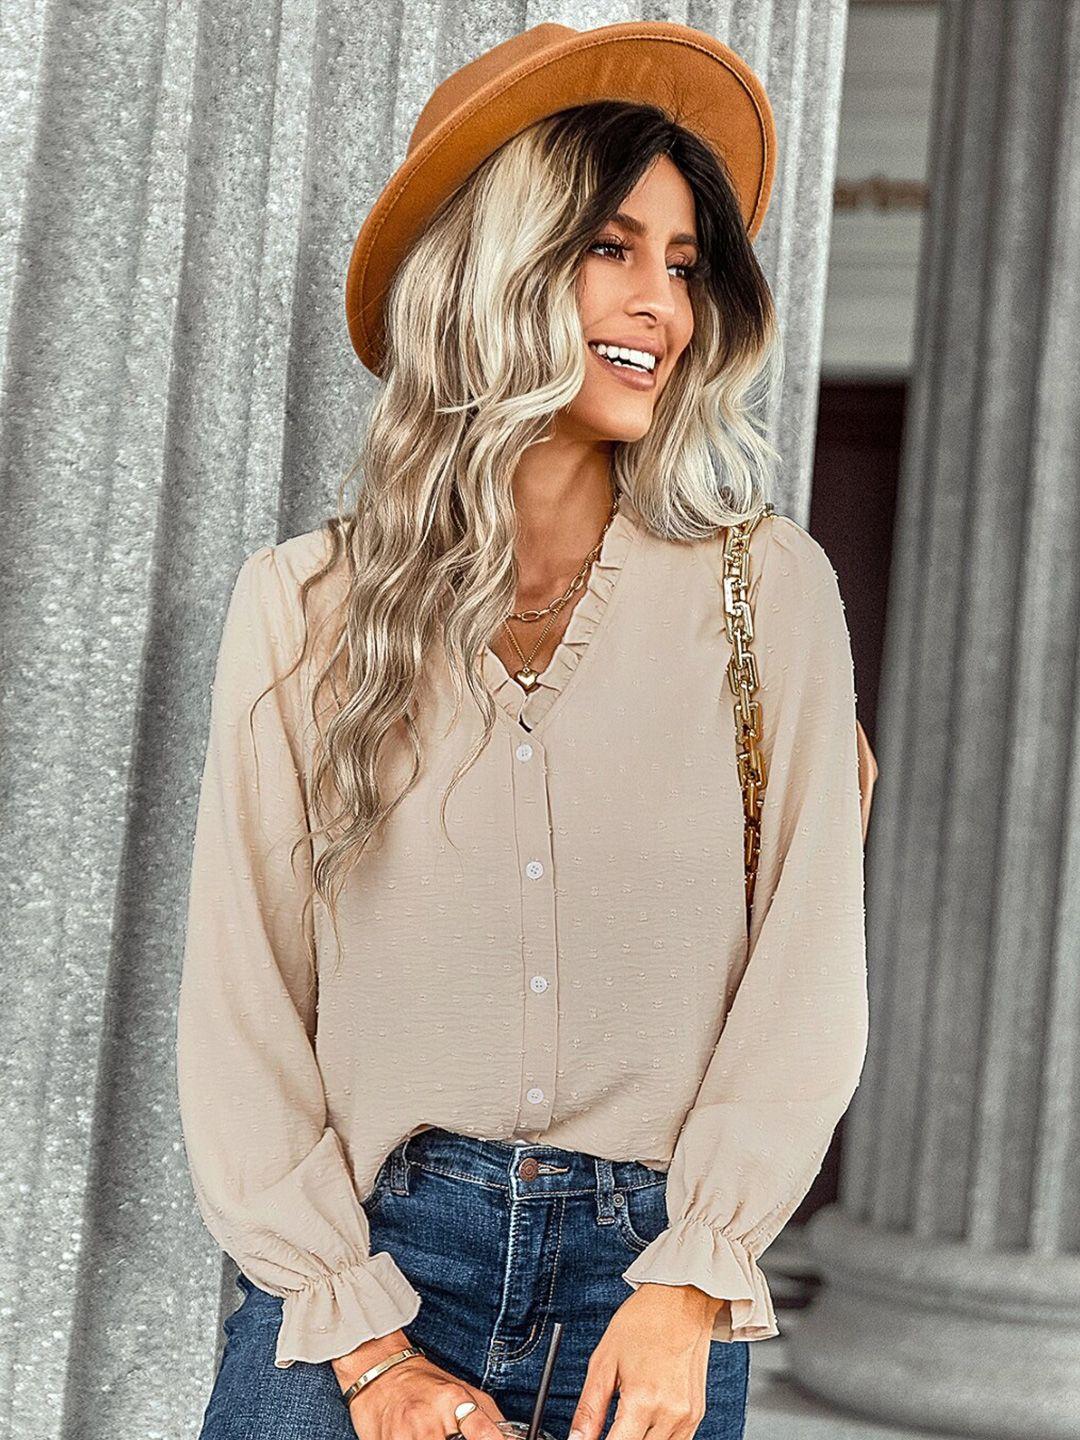 stylecast beige striped shirt style top